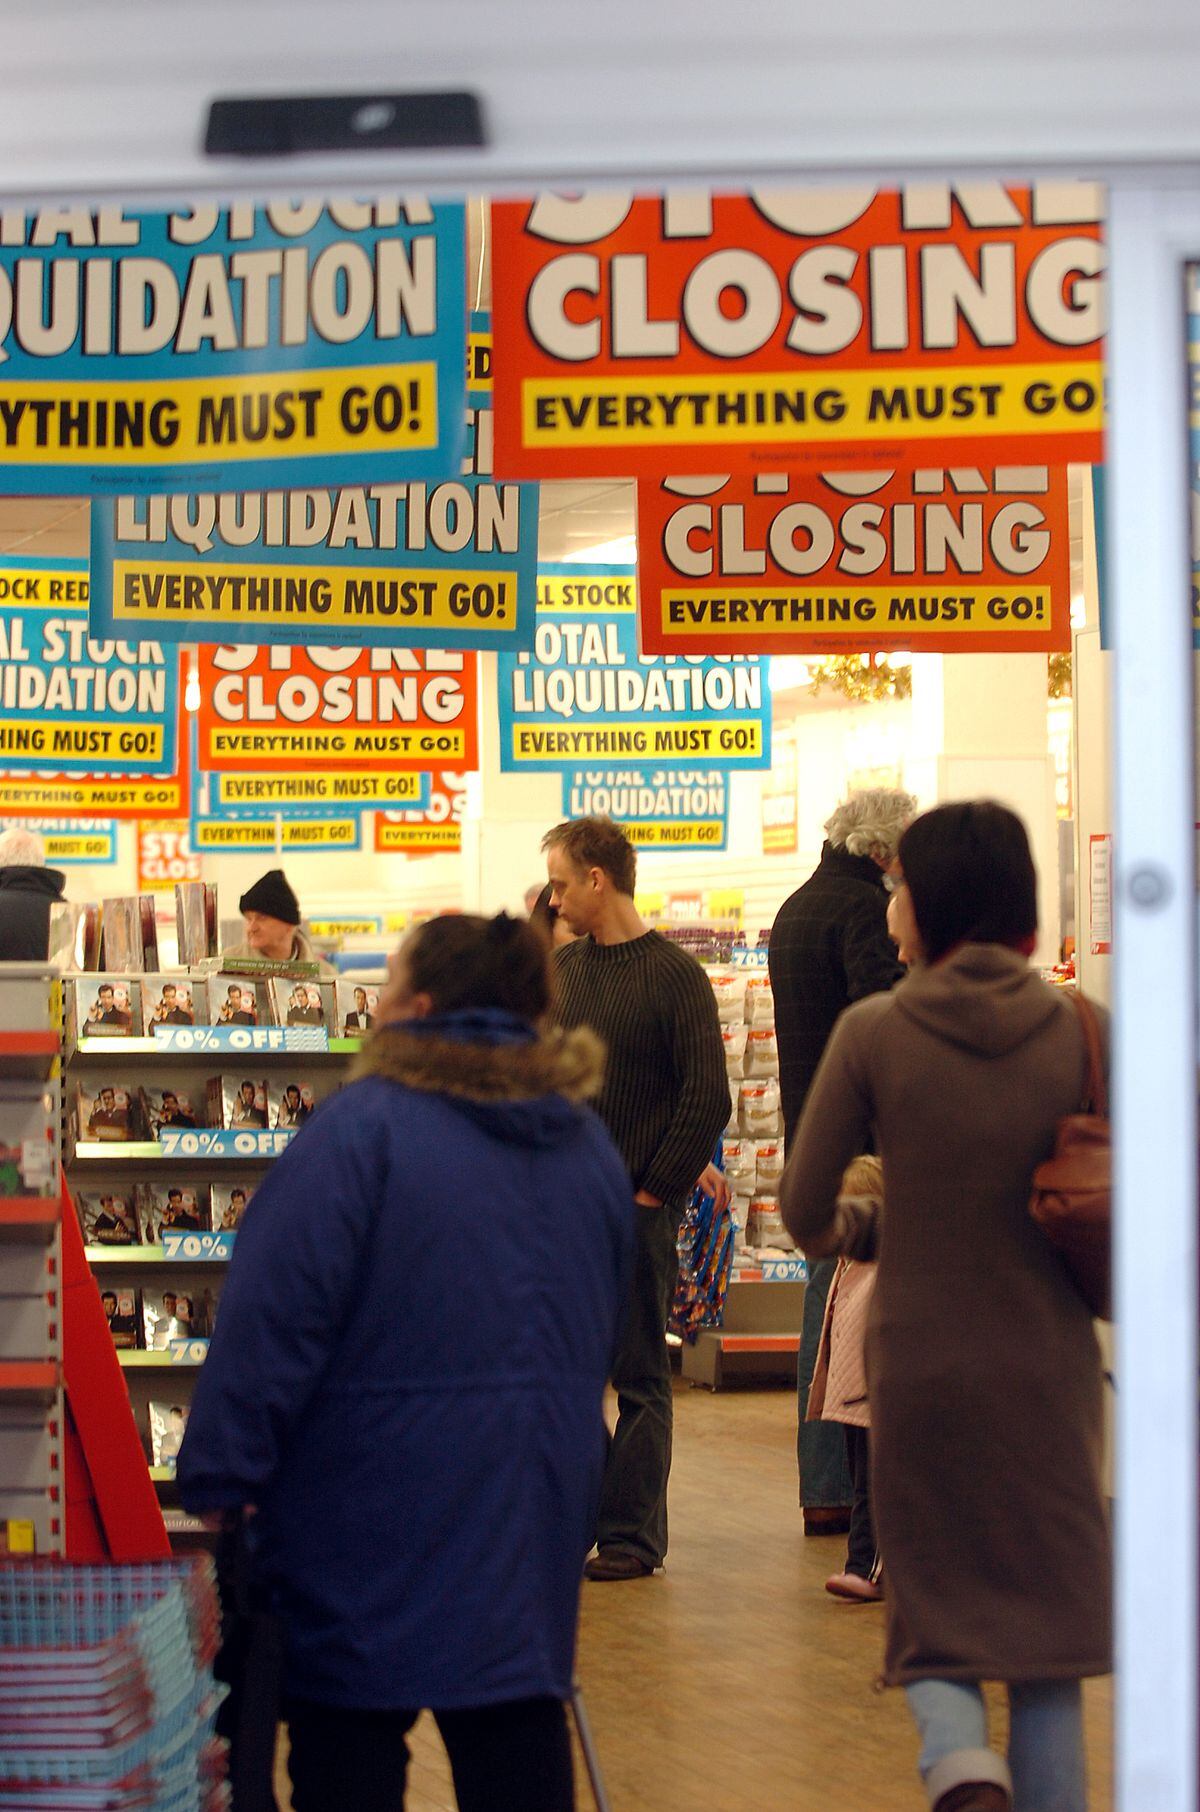 The last day of trading at Woolworths in High Street, Newport – December 27, 2008.